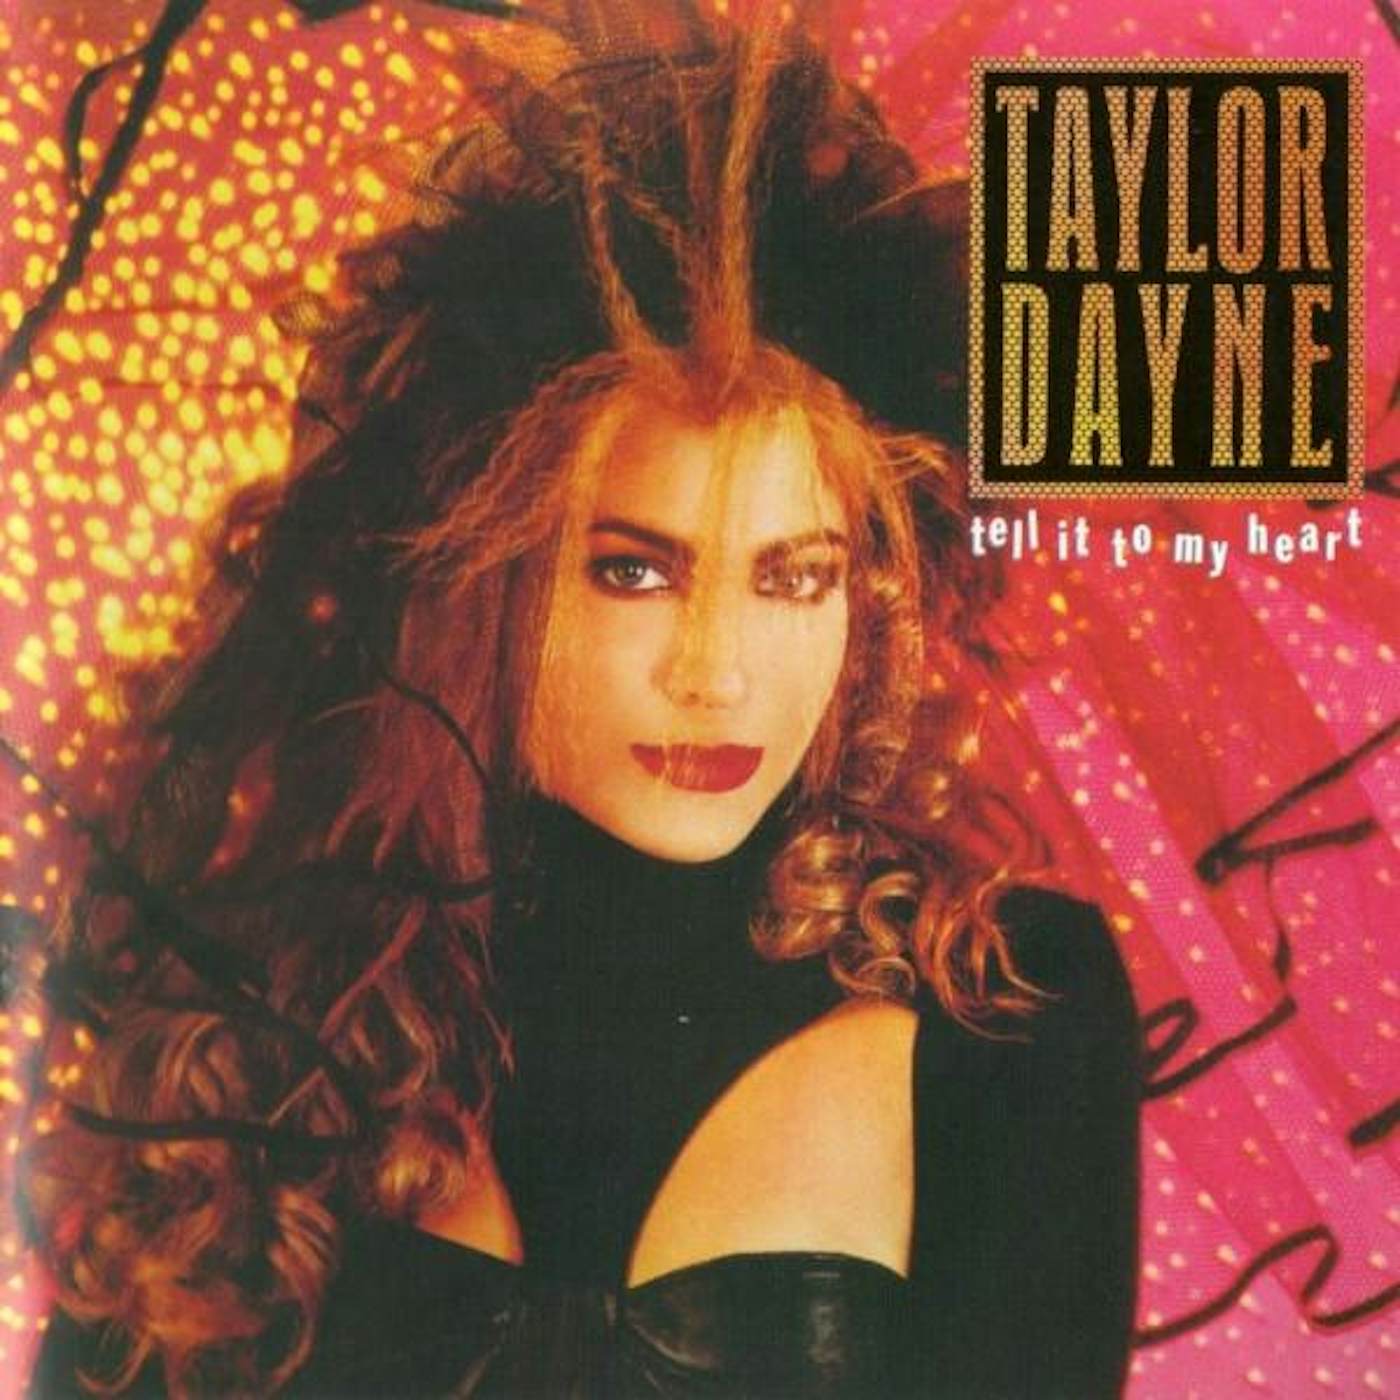 Taylor Dayne TELL IT TO MY HEART CD